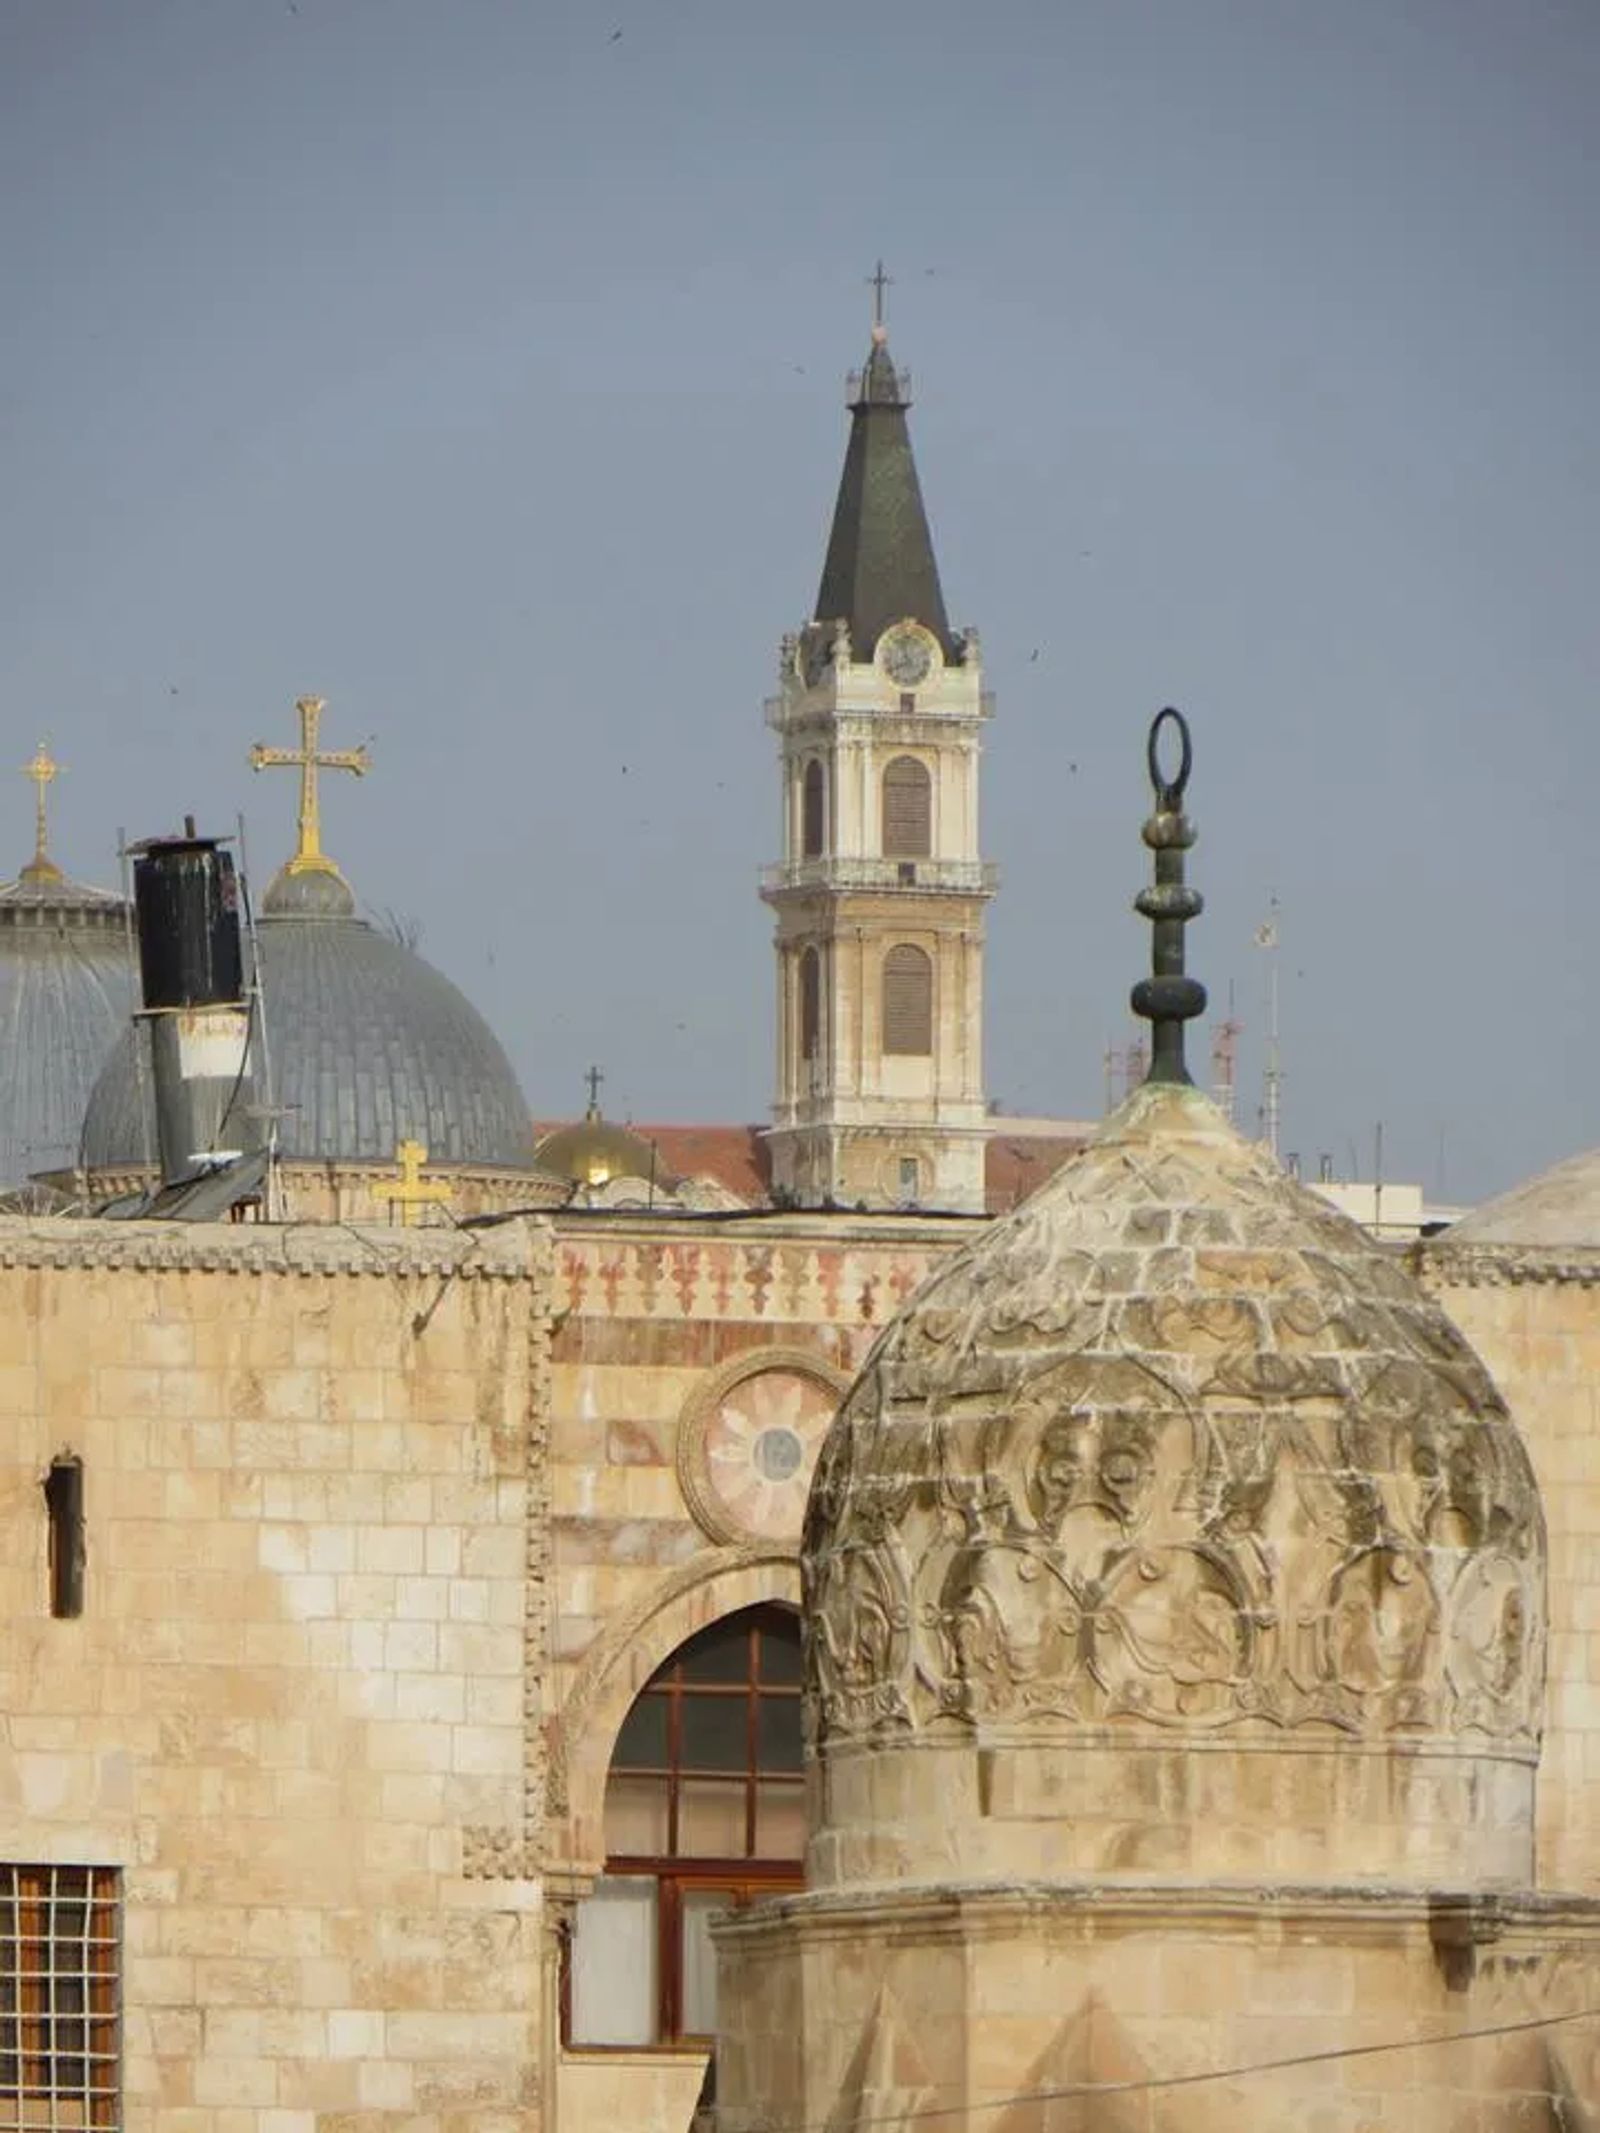 Jerusalem Churches with different religious symbols